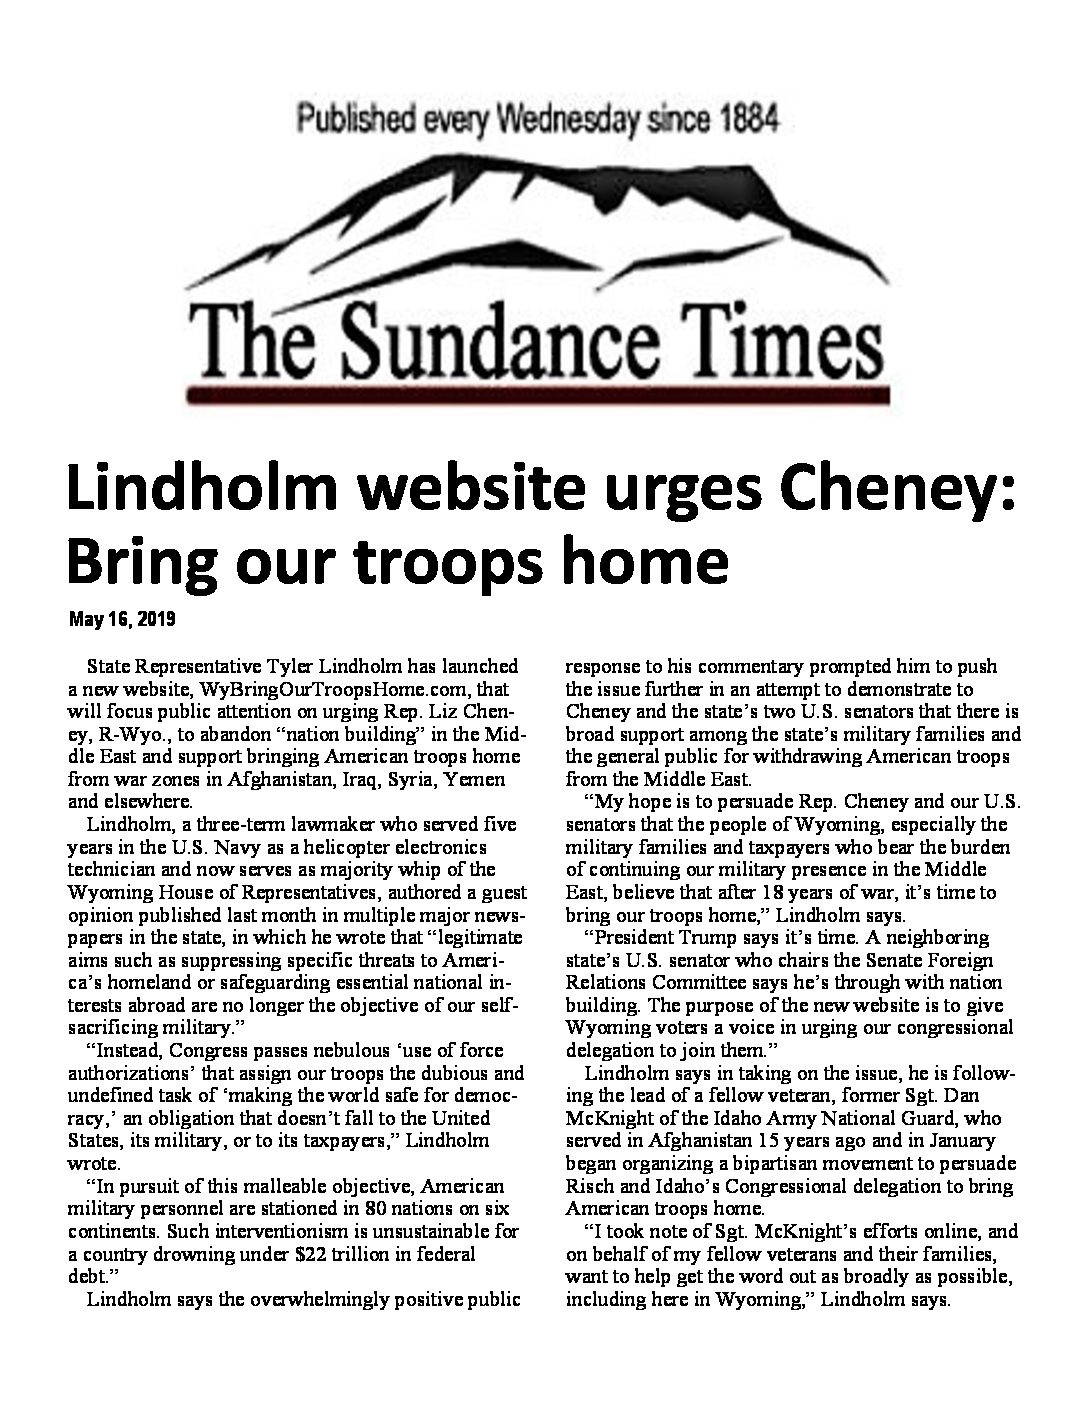 The Sundance Times – Lindholm website urges Cheney – Bring Our Troops Home